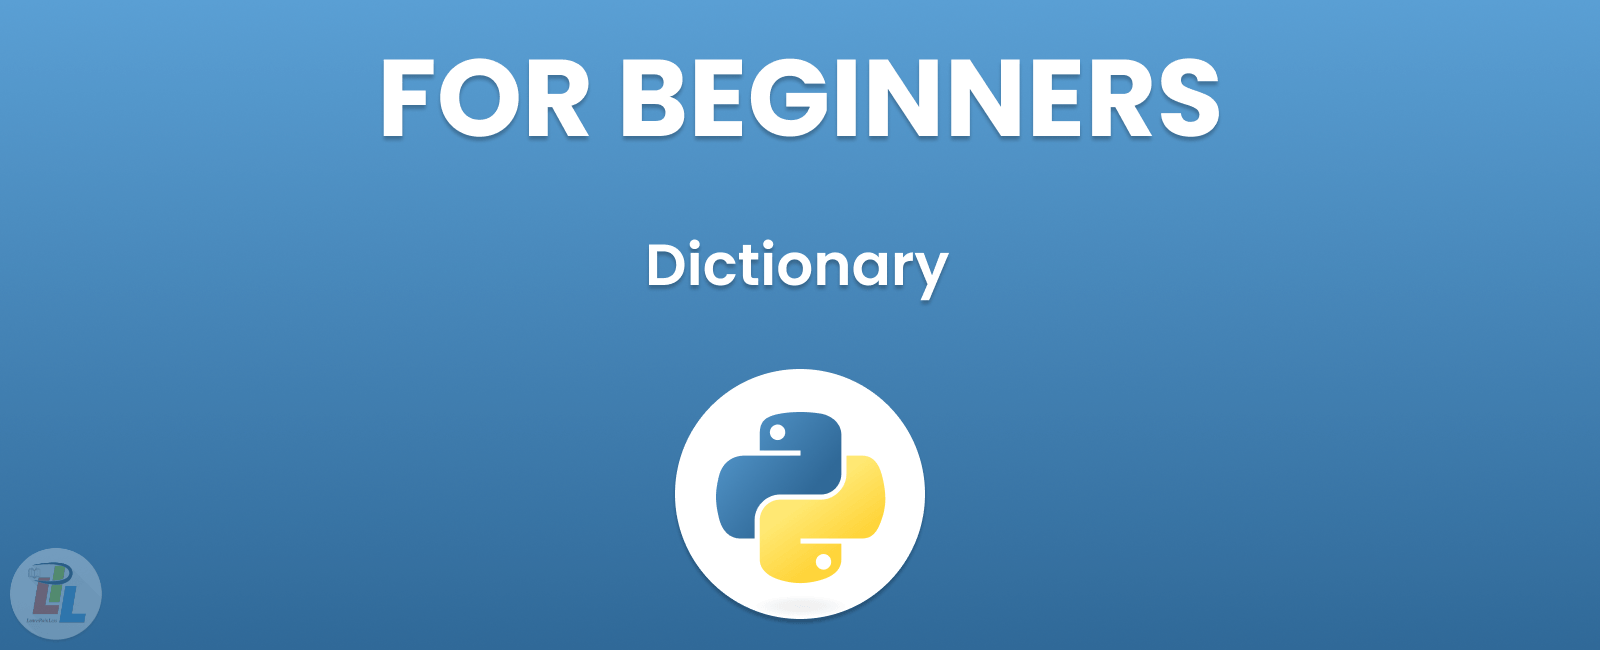 Python Tutorial for Beginners | Dictionary in Python